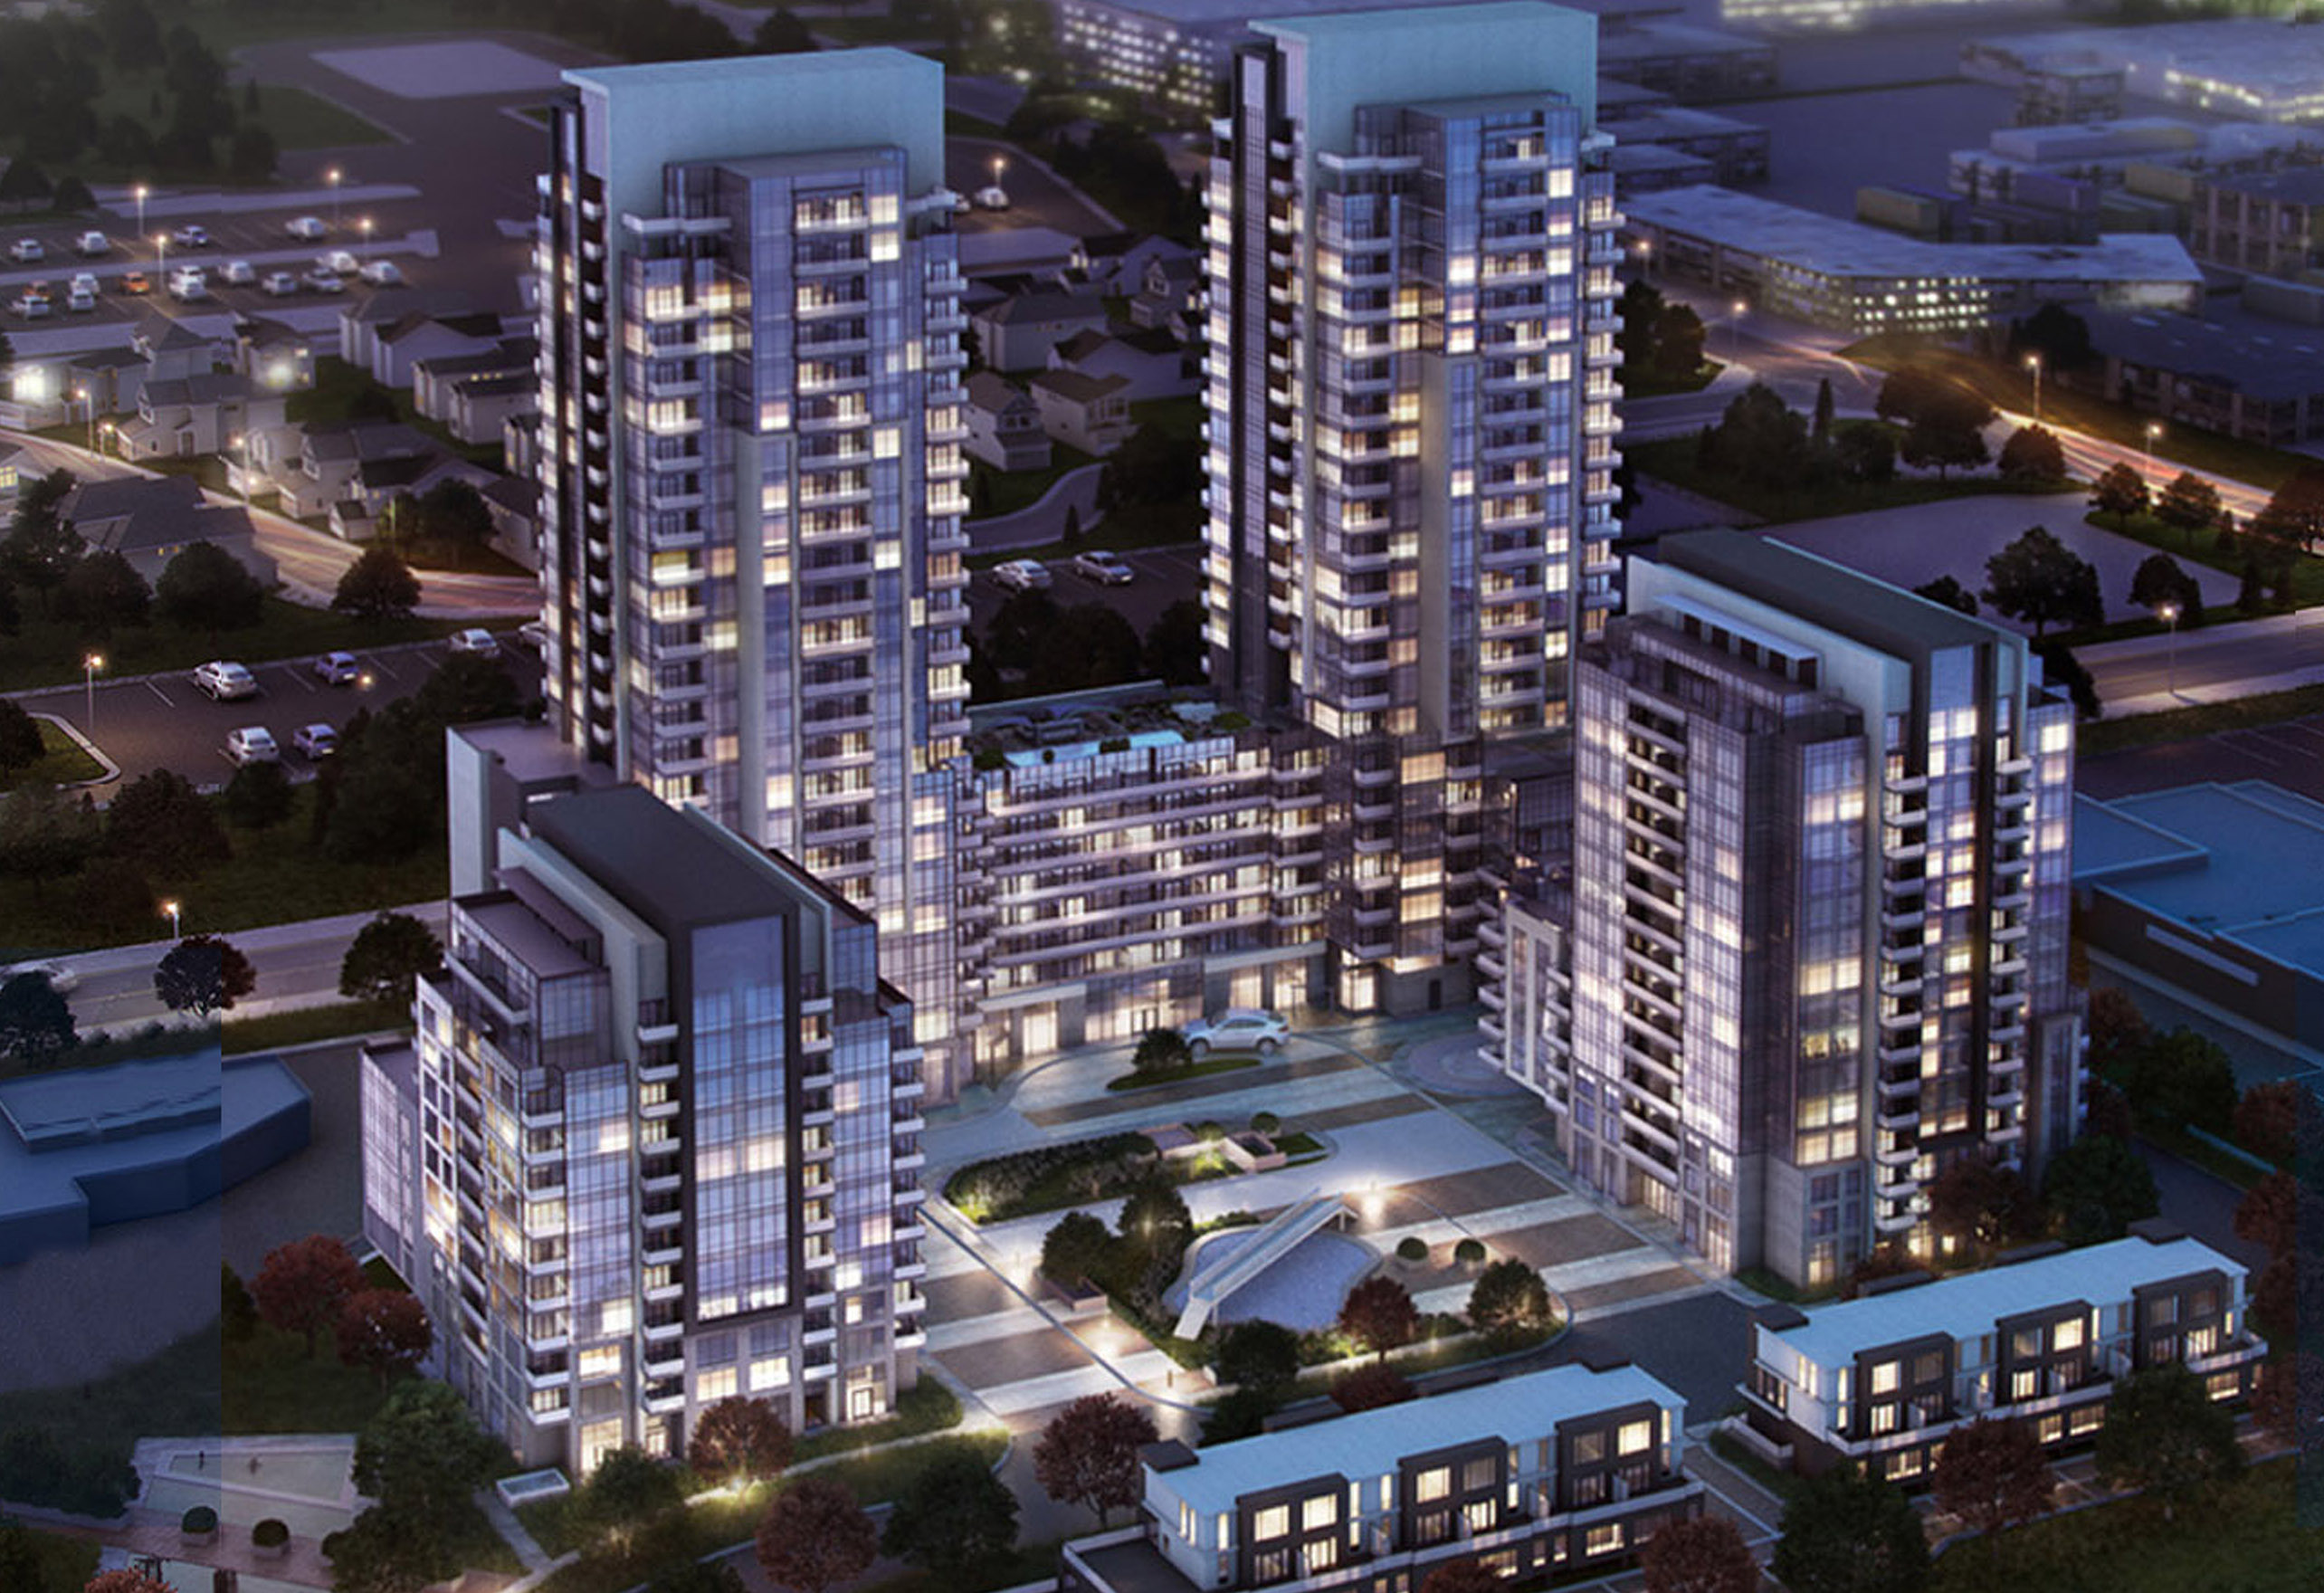 ME2 Condos is a new high rise condo complex by Lash Group of Companies located in 1151 Markham Rd, Toronto, ON.